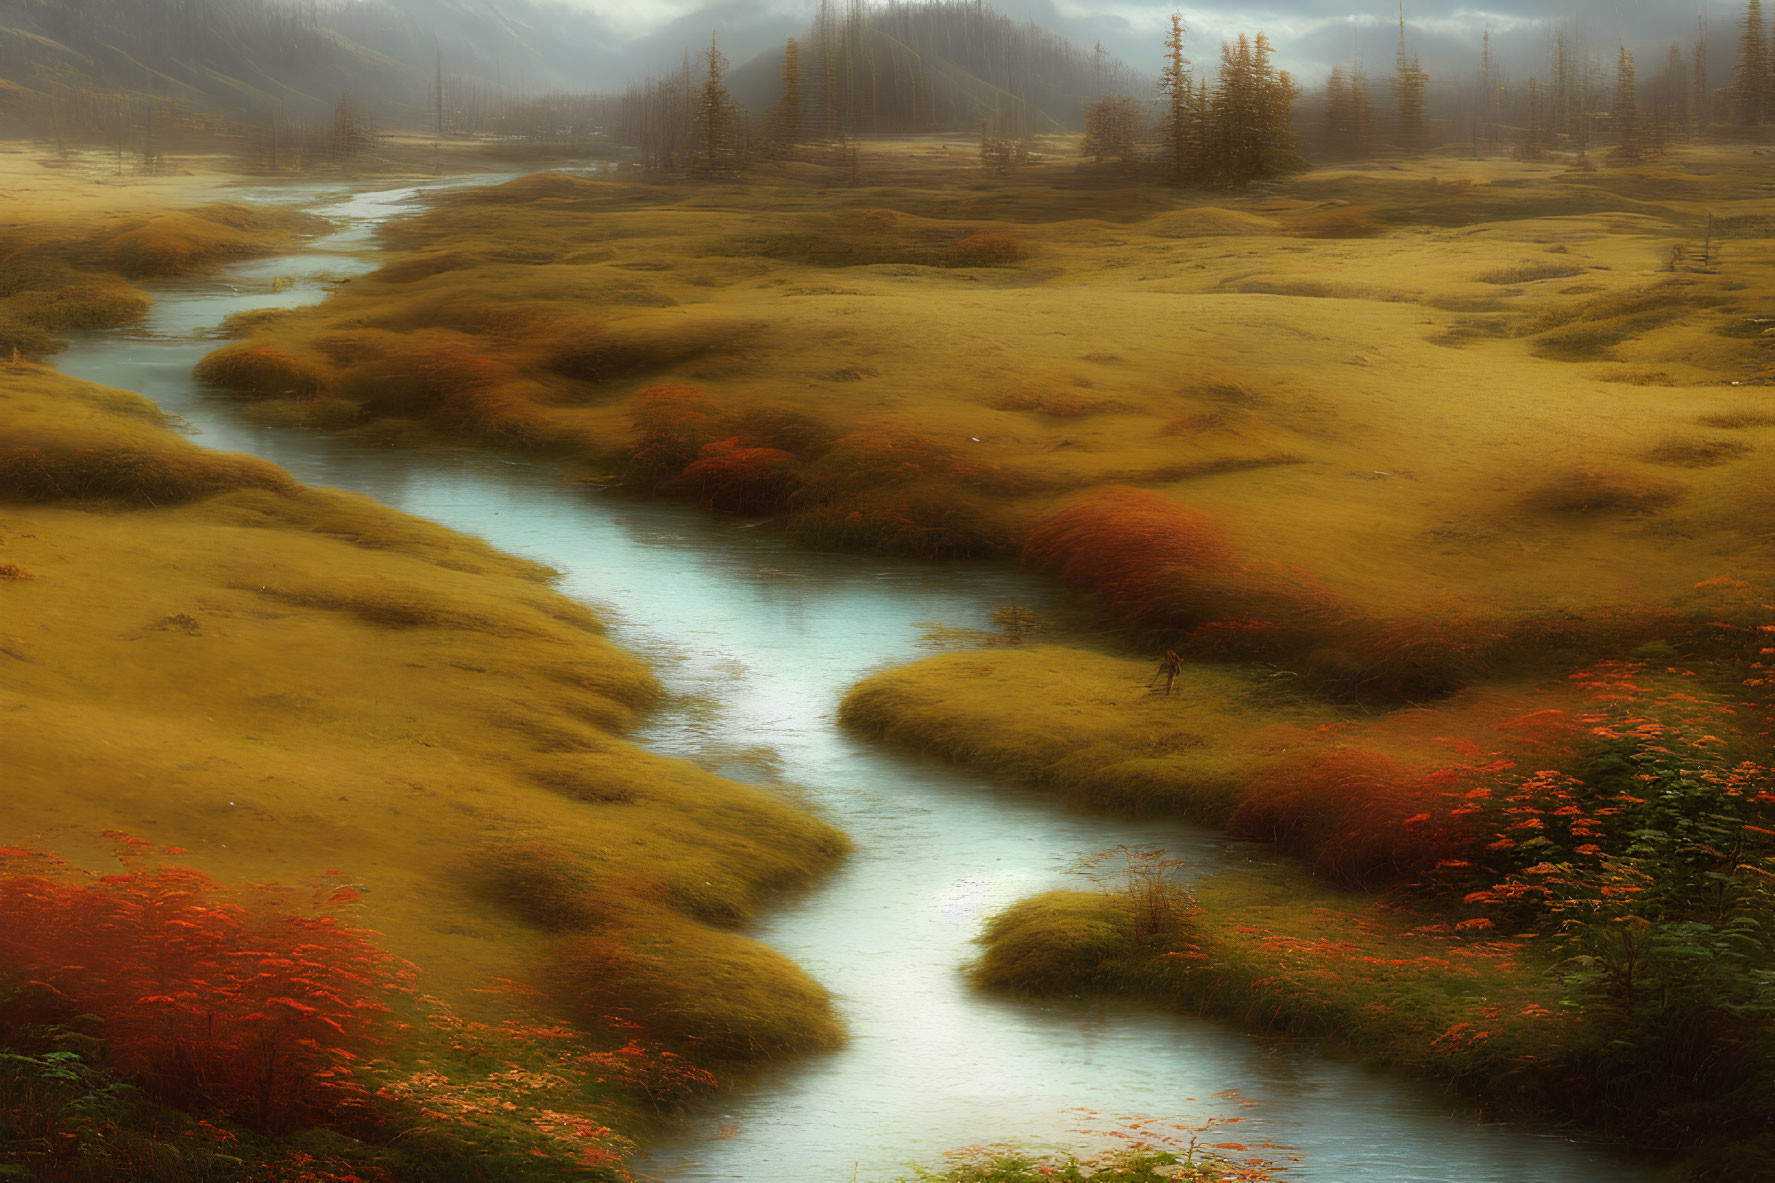 Scenic river flowing through misty landscape with golden grasses